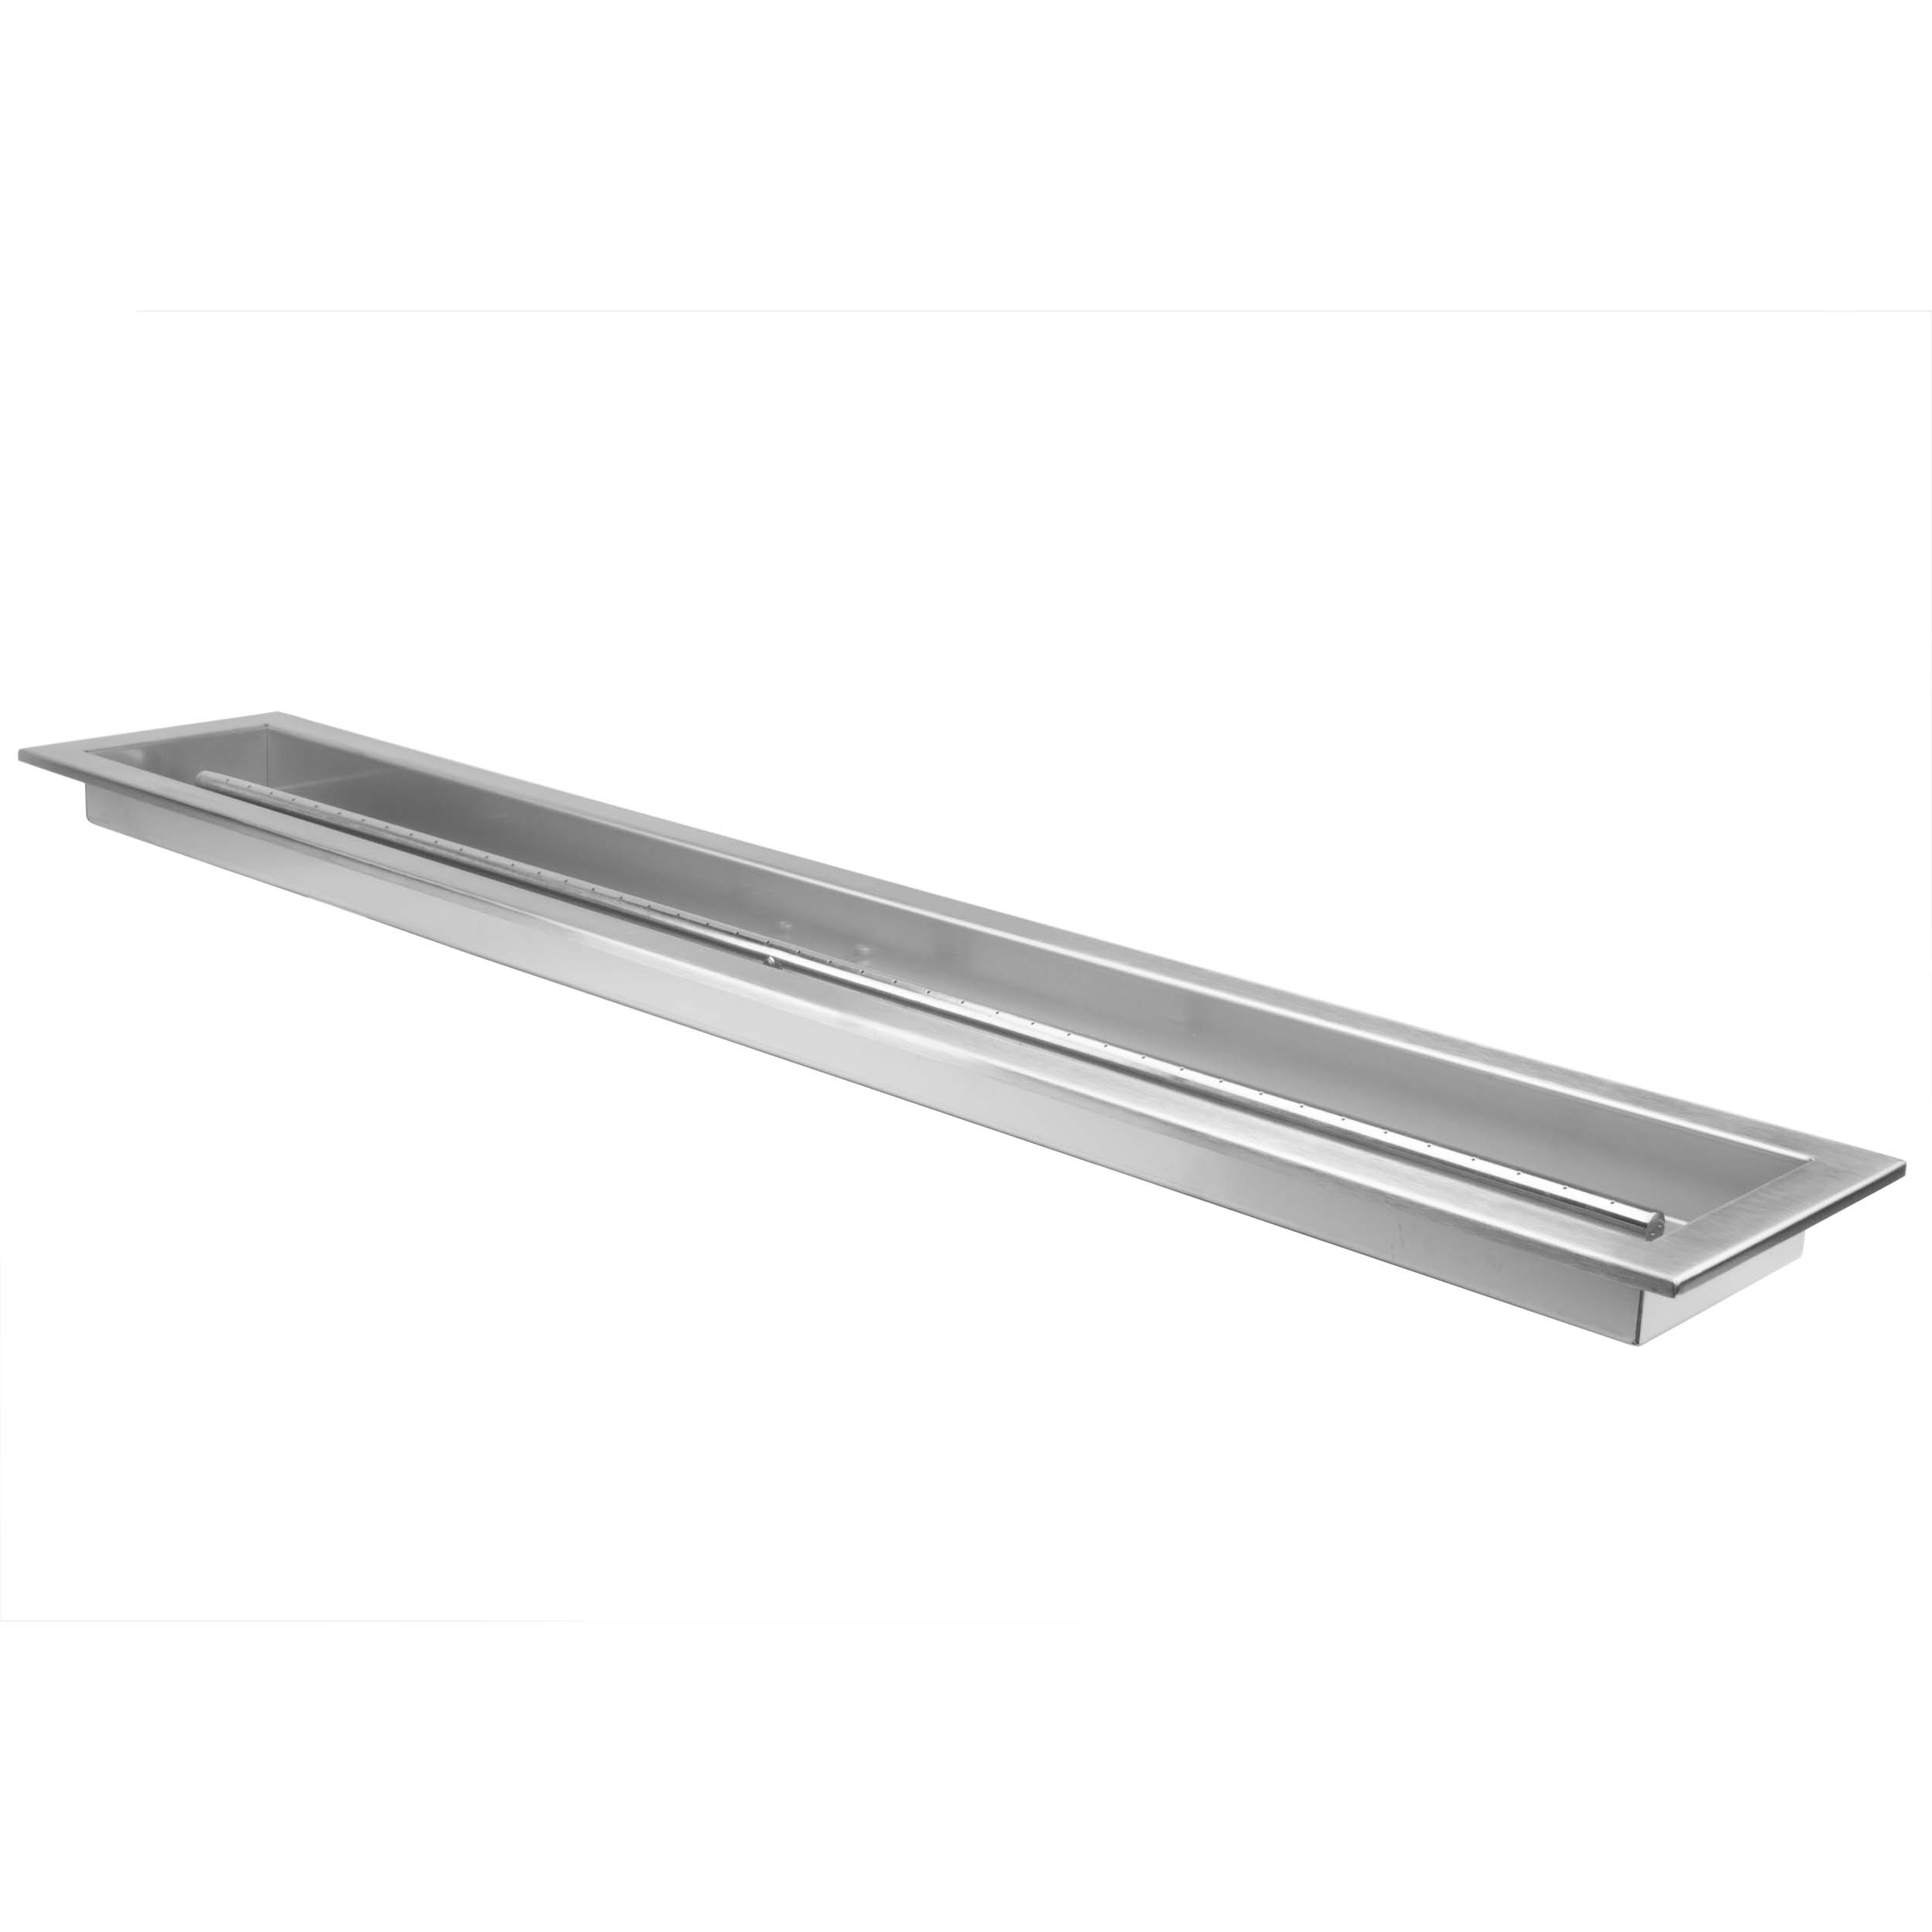 Stanbroil Stainless Steel Linear Trough Drop-in Fire Pit Pan and Burner 30 by 6-Inch Renewed 